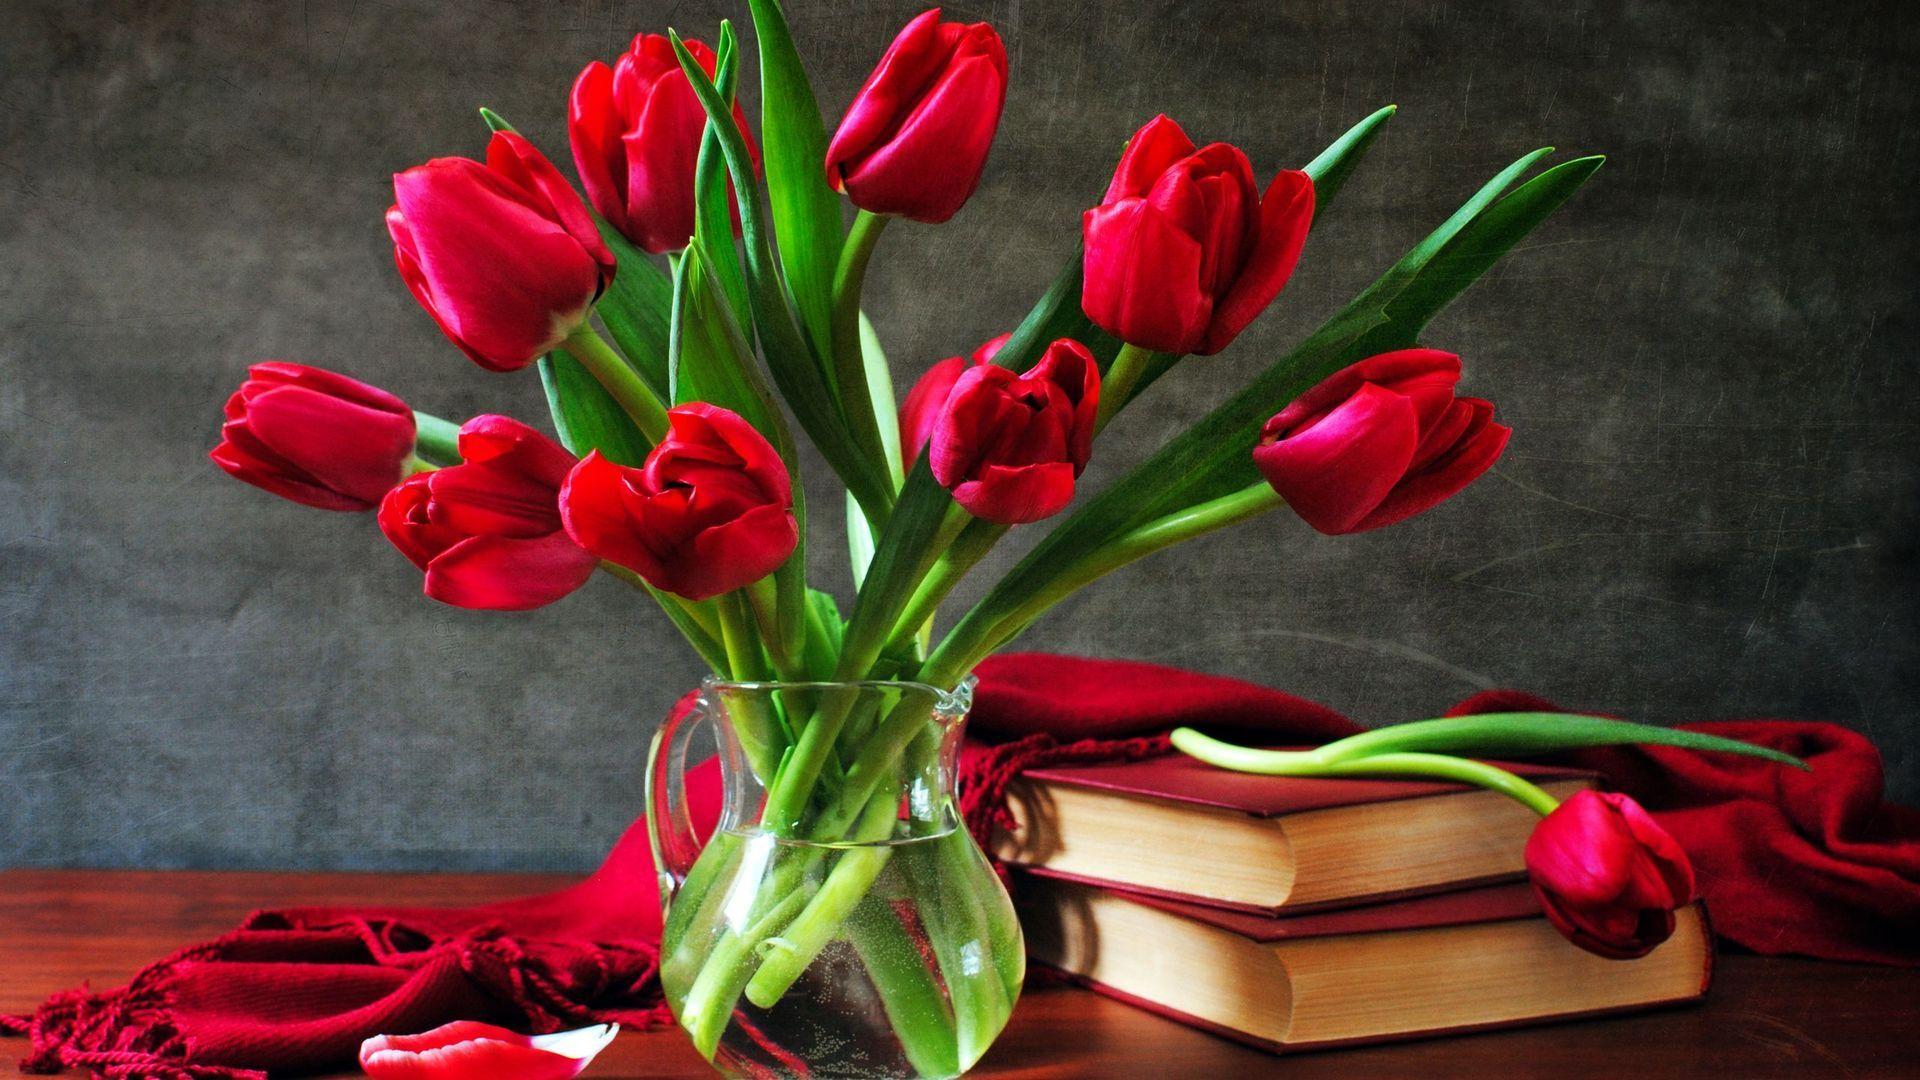 Red tulips Wallpaper #